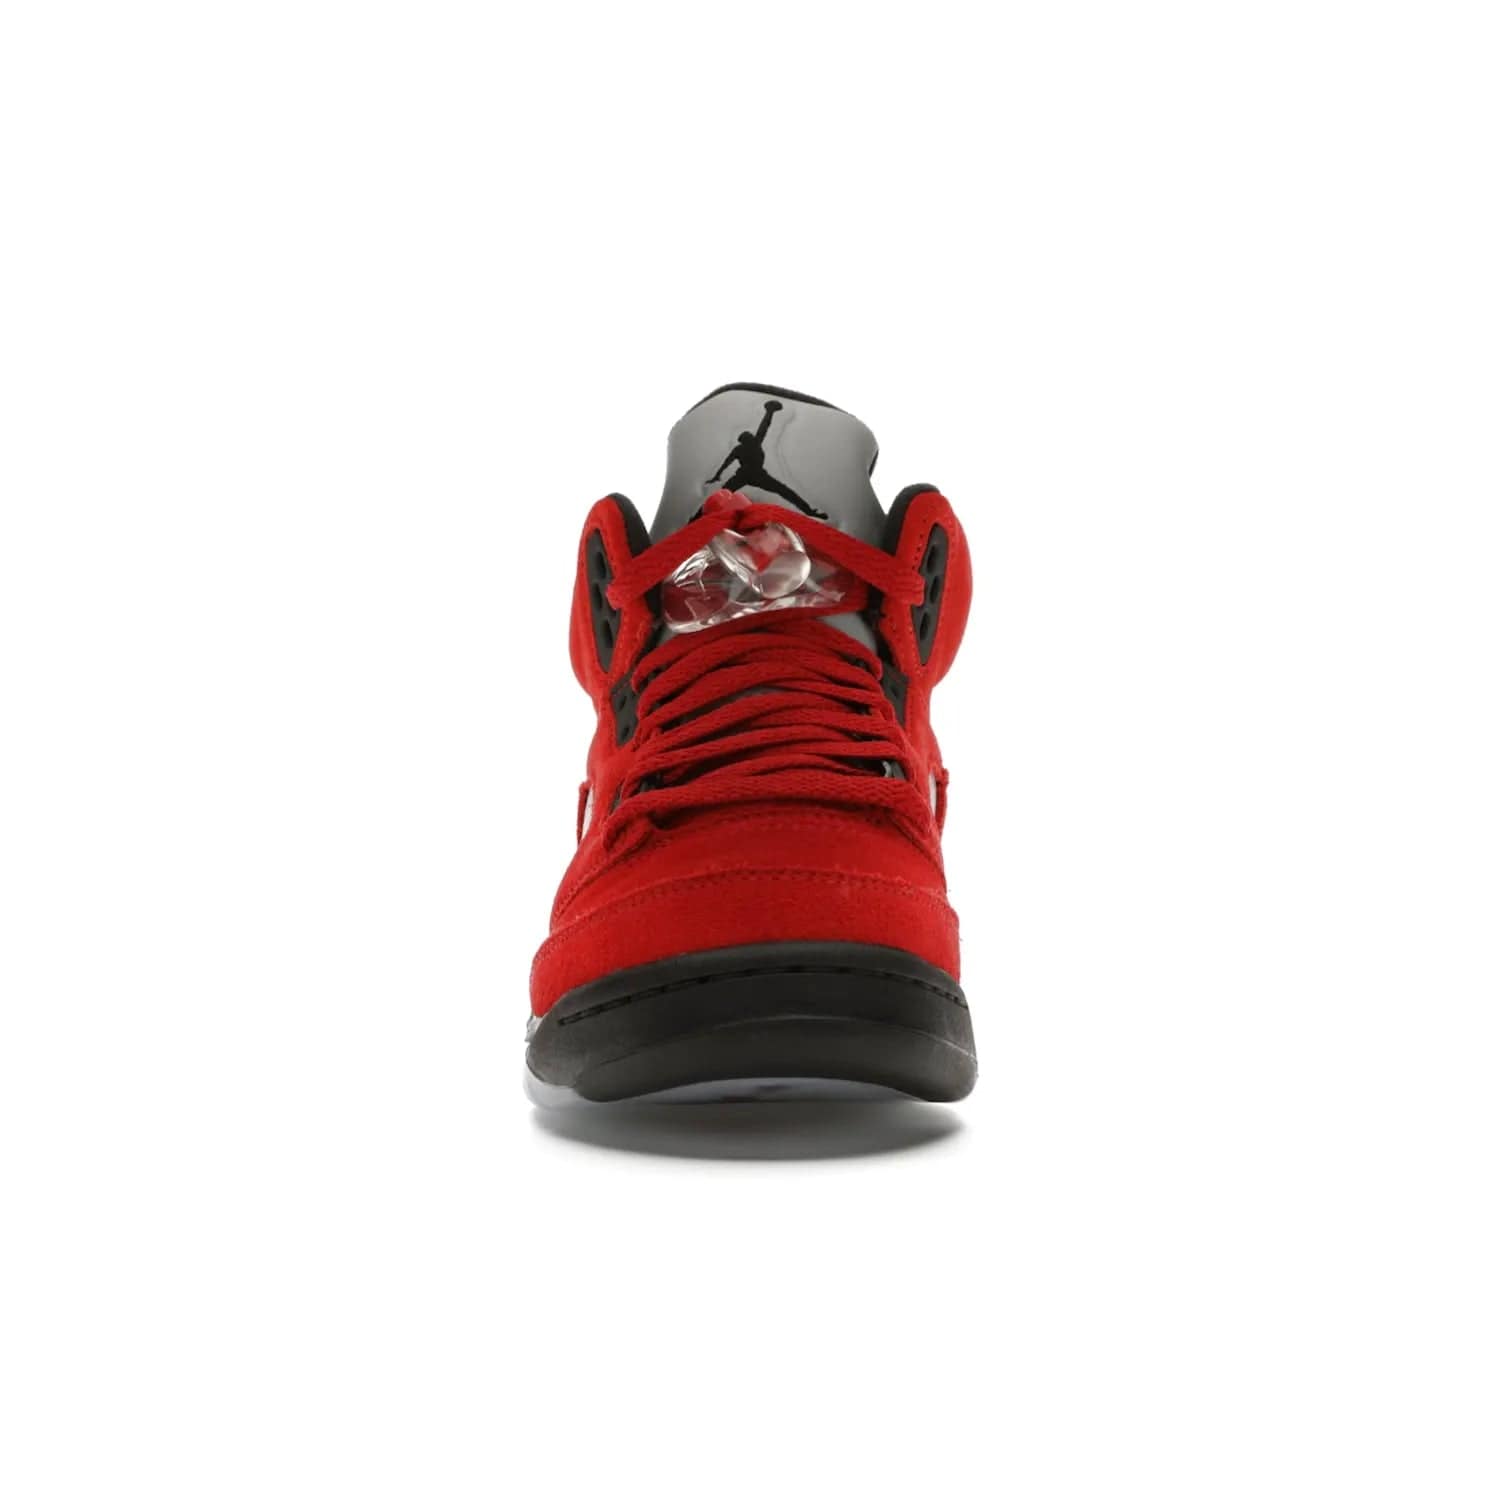 Jordan 5 Retro Raging Bull Red (2021) (GS) - Image 10 - Only at www.BallersClubKickz.com - Jordan 5 Retro Raging Bulls Red 2021 GS. Varsity Red suede upper with embroidered number 23, black leather detail, red laces, and midsole with air cushioning. Jumpman logos on tongue, heel, and outsole. On-trend streetwear and basketball style. Released April 10, 2021.